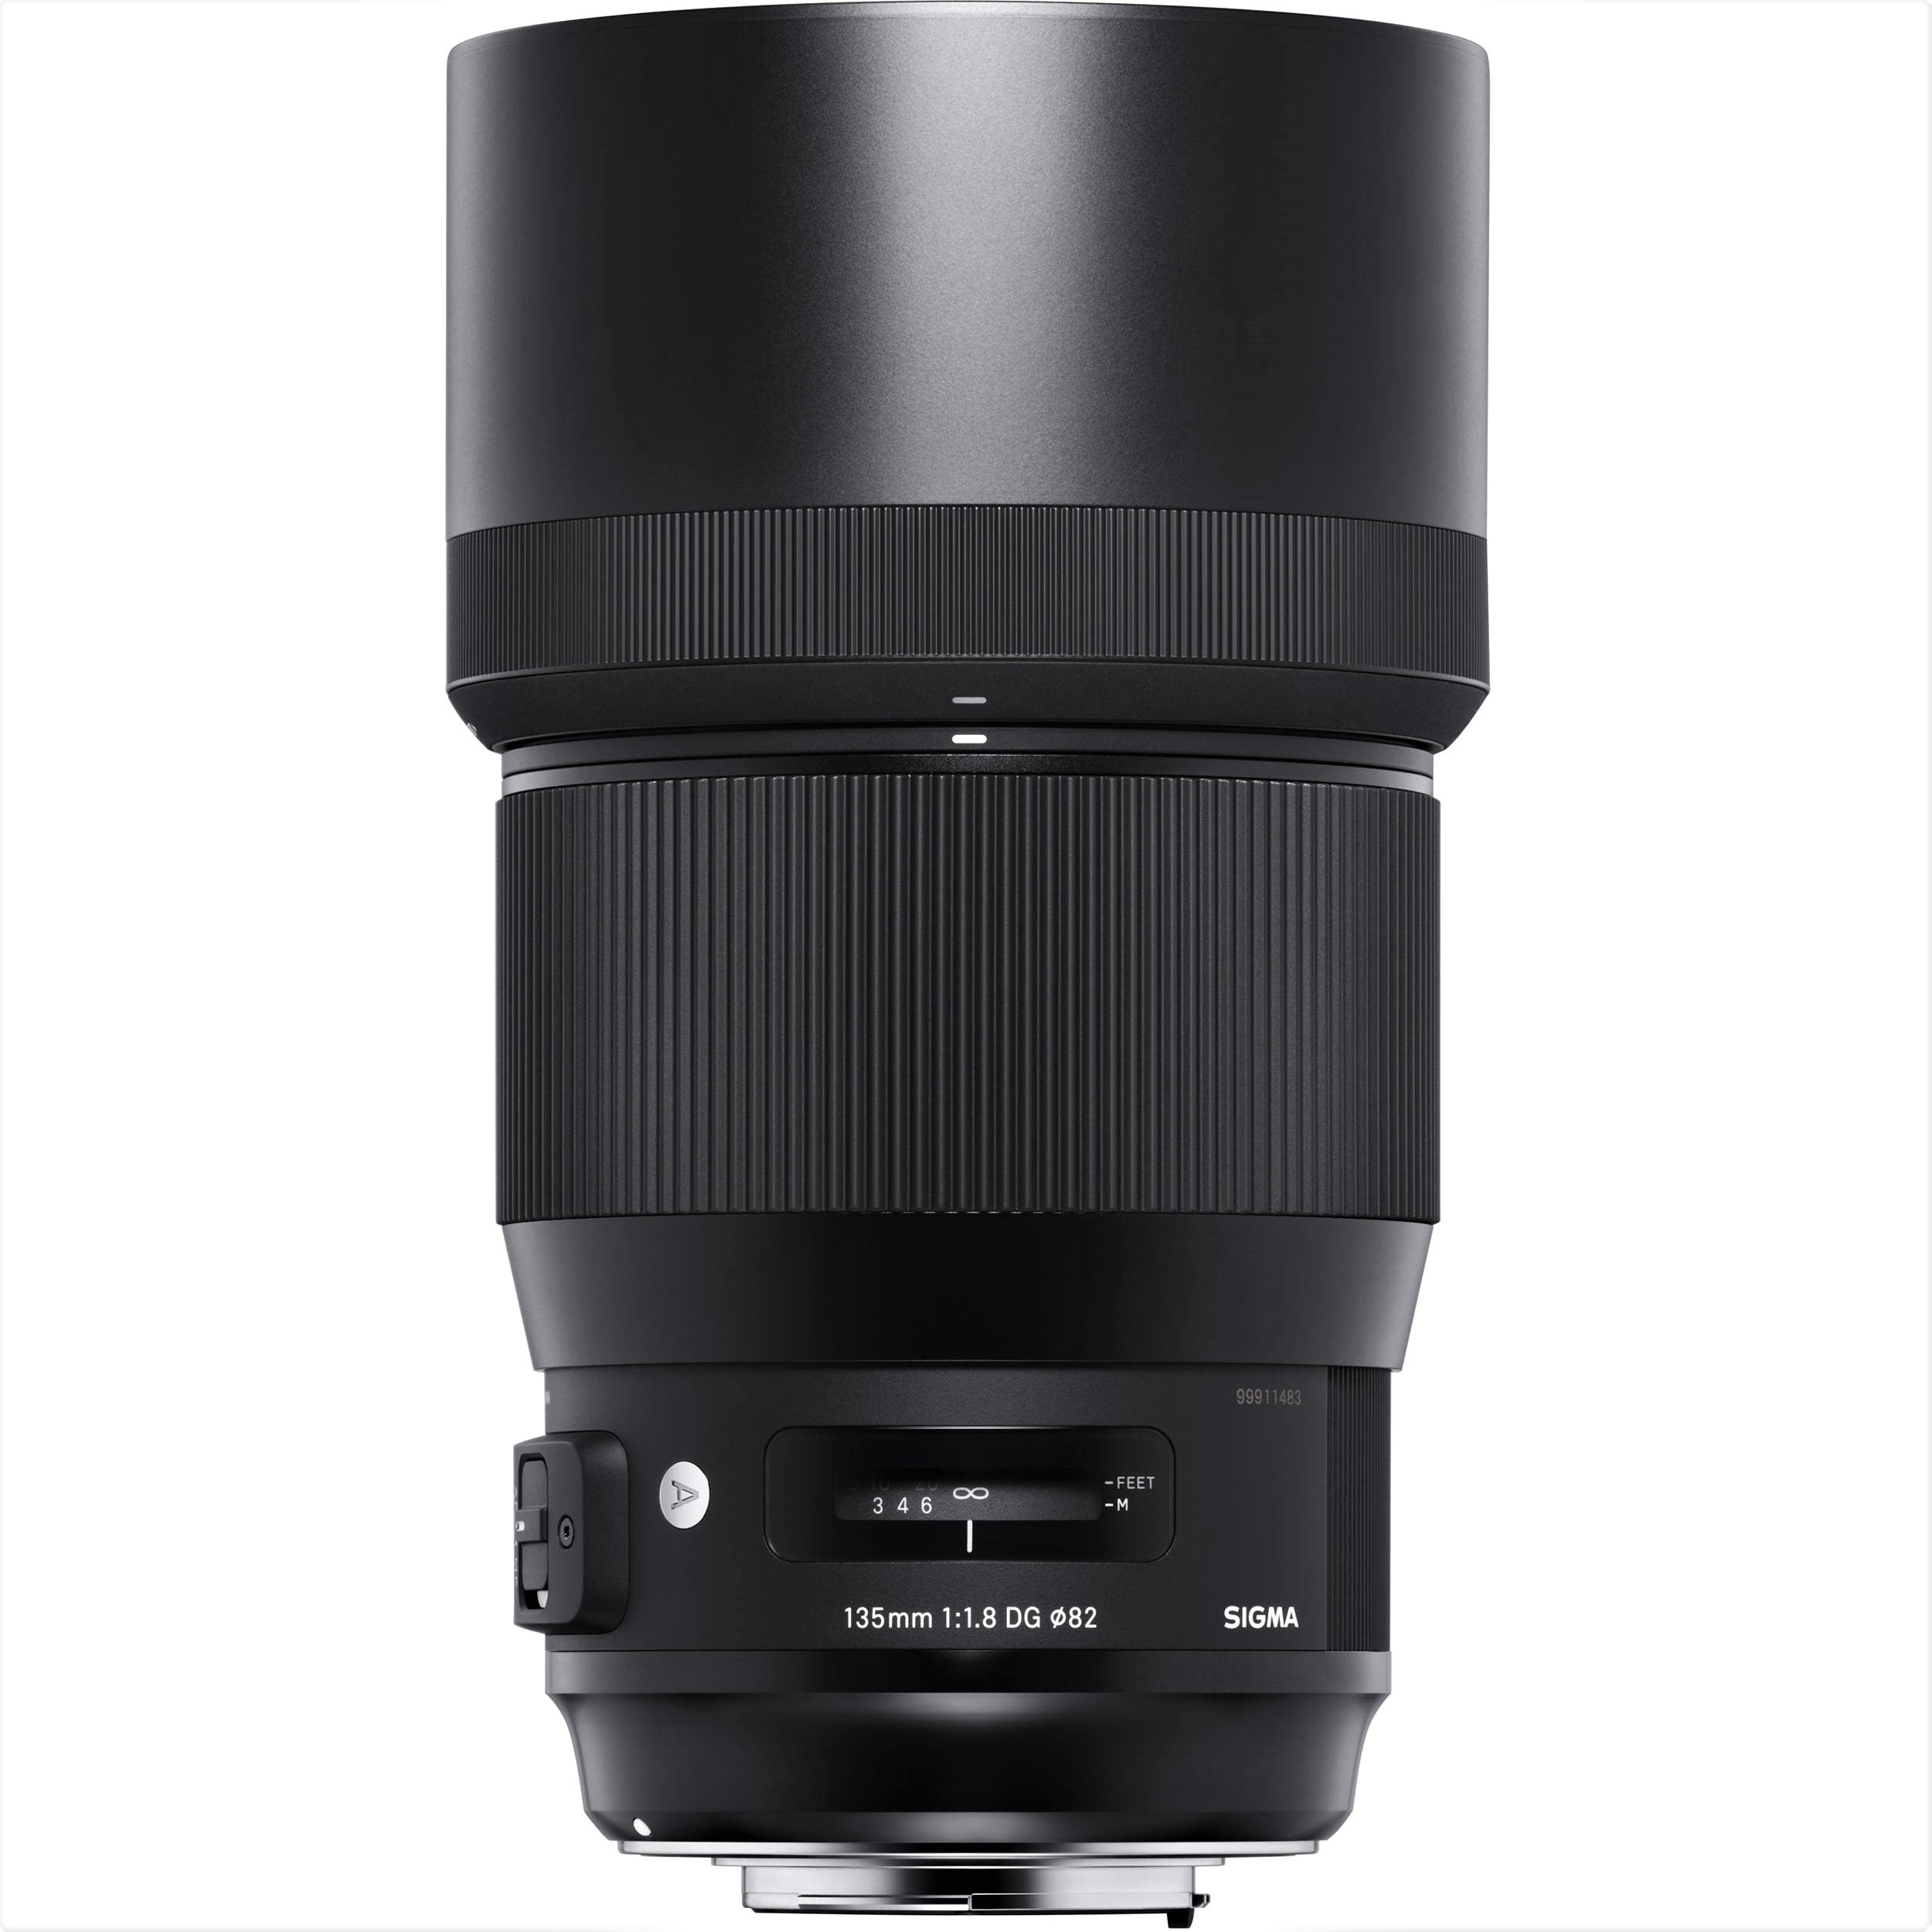 Sigma 135mm F1.8 DG HSM Art Lens for Sigma SA with Attached Lens Hood on the Top